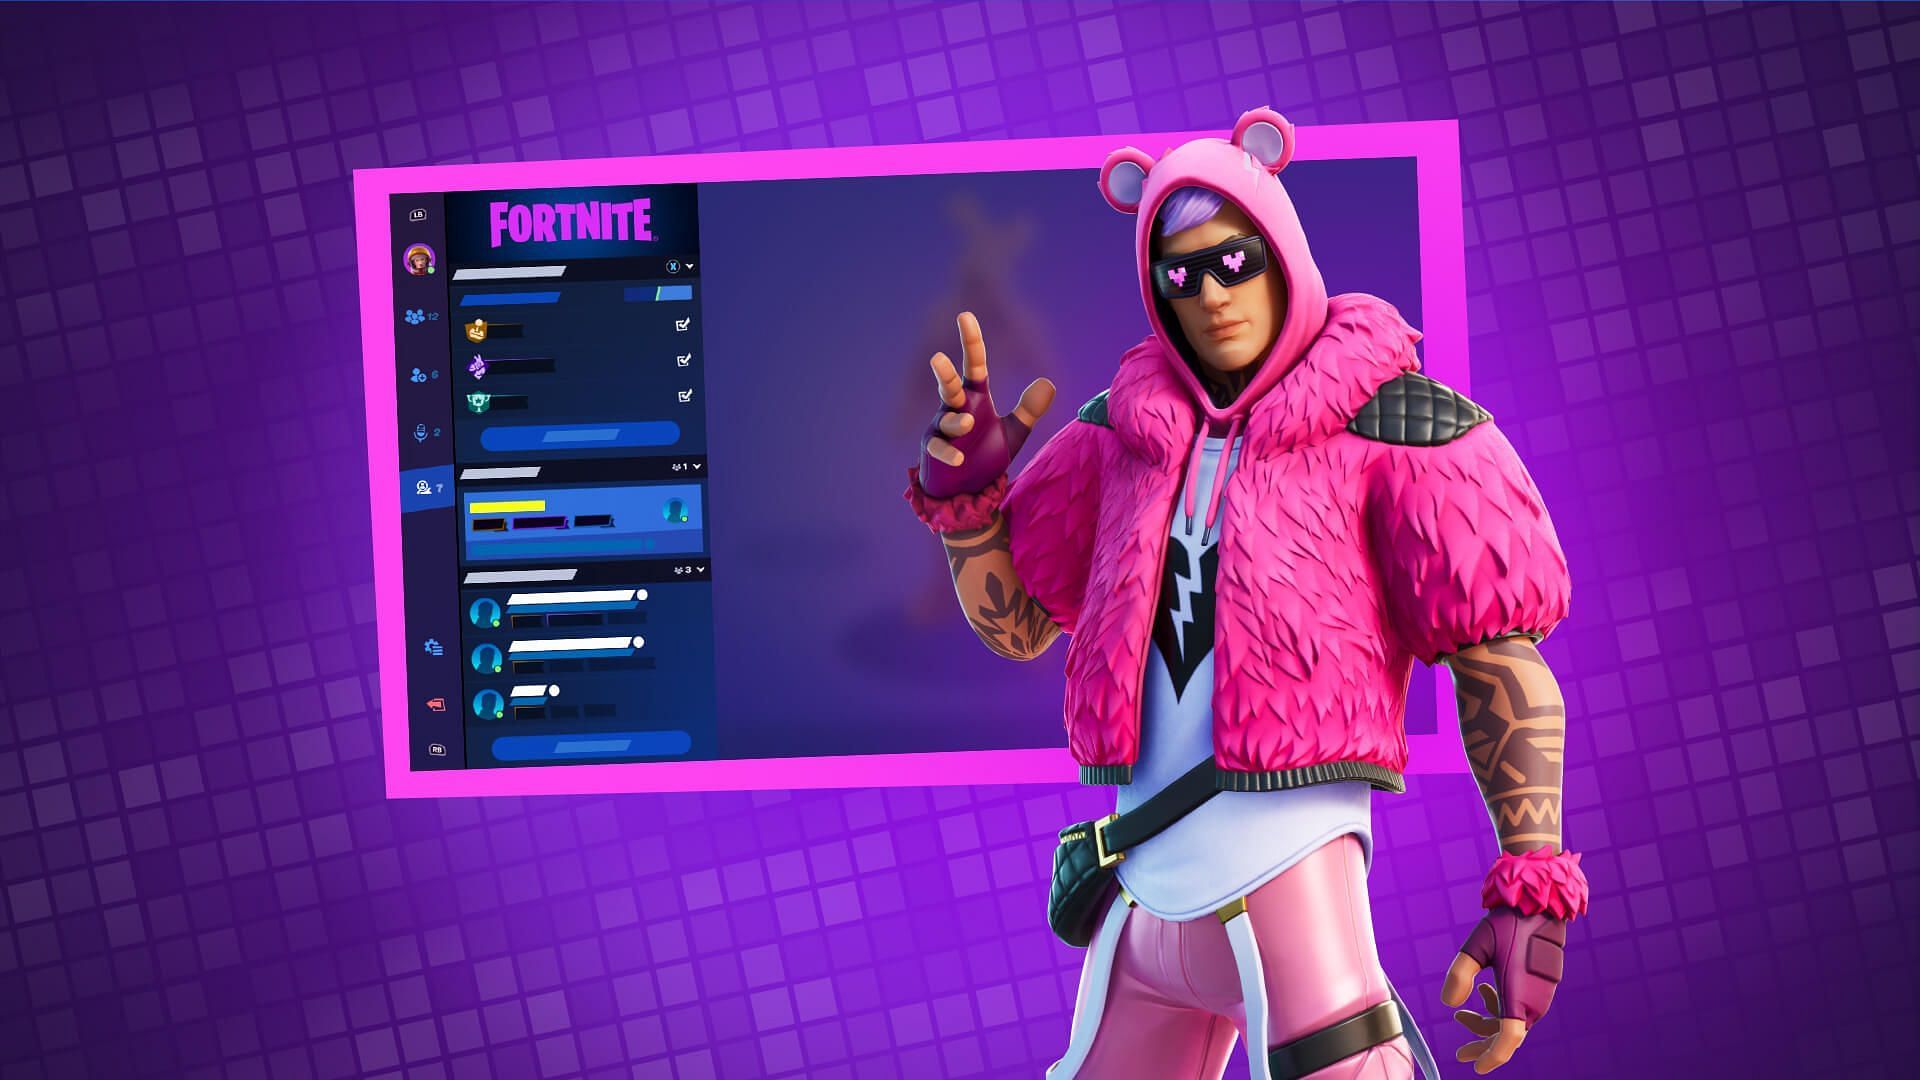 Fortnite Social Tags and Looking for Party (Image via Epic Games)